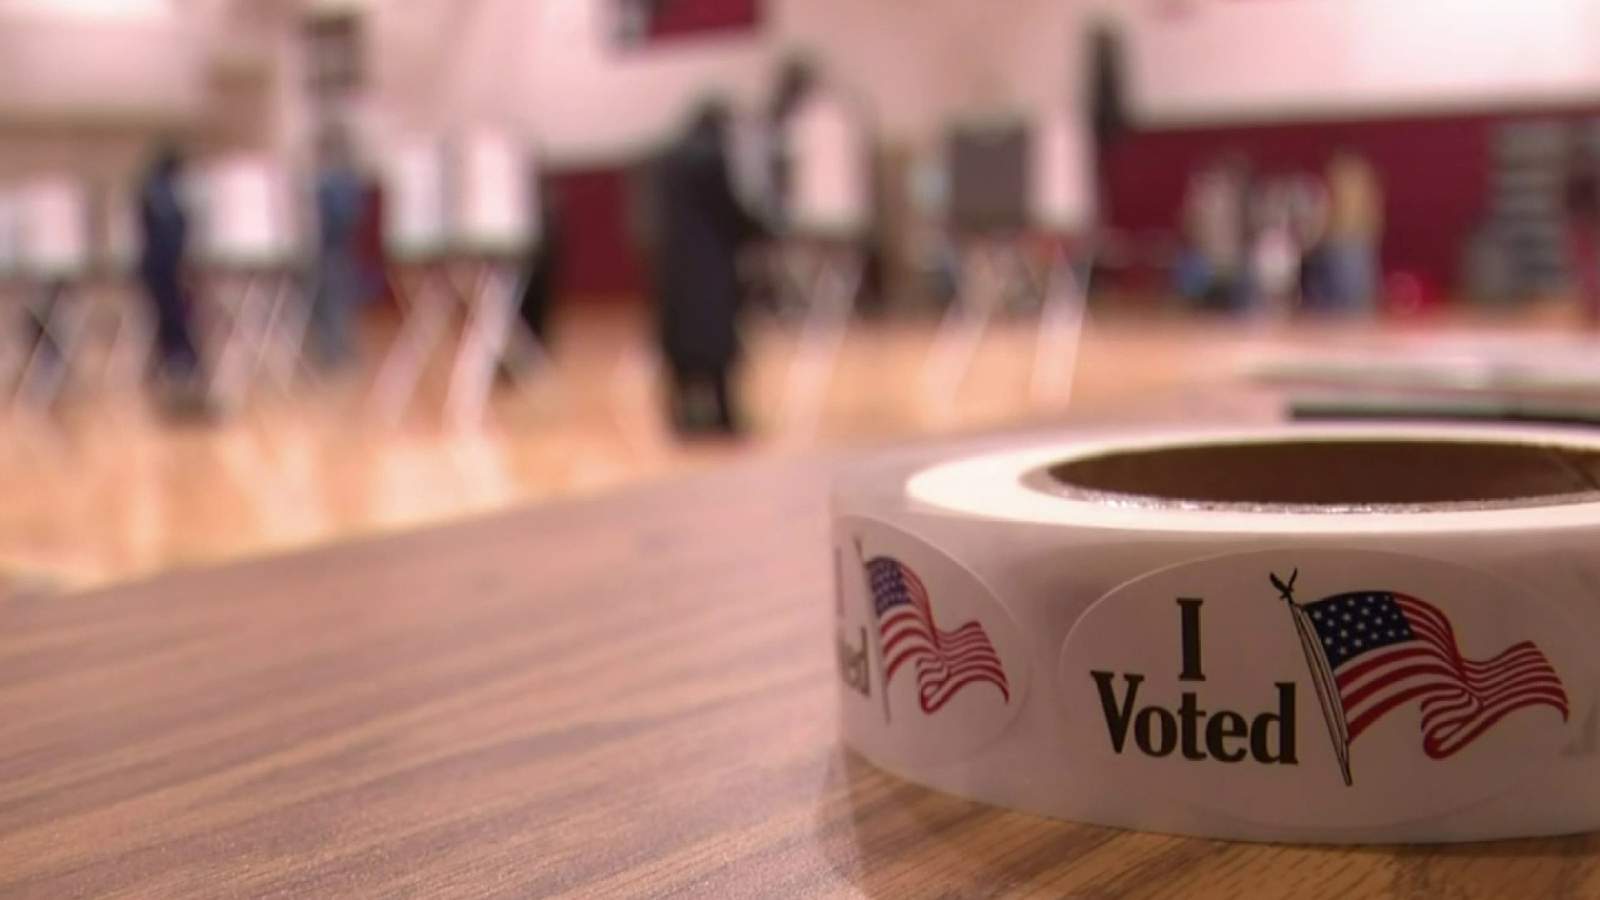 In-person voters: Did you encounter any issues while voting in Michigan Tuesday?